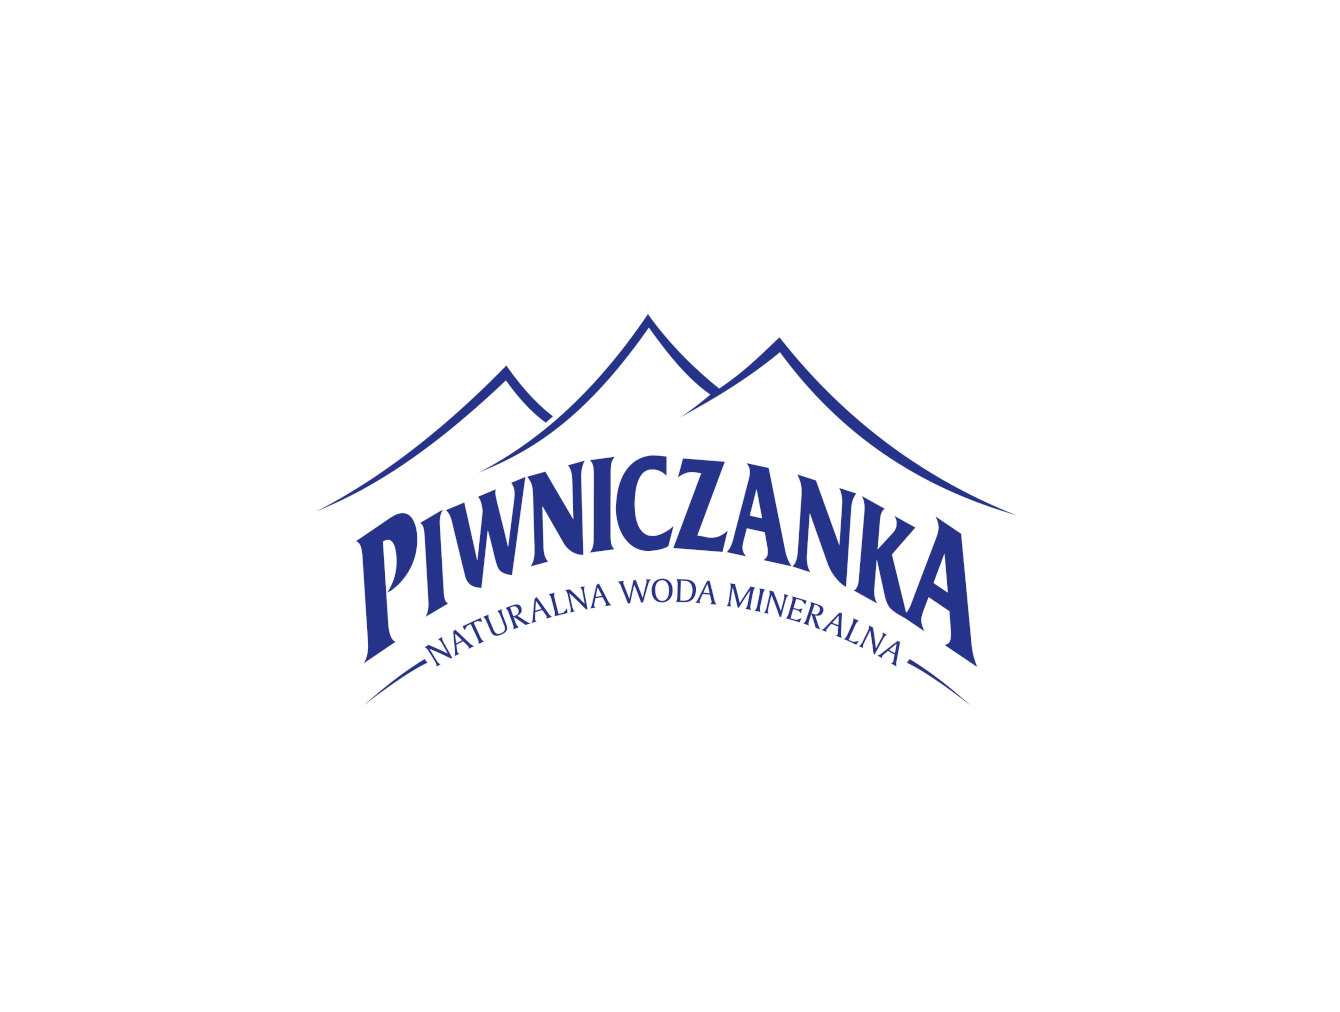 This year, during IO2022, we will be able to try the Piwniczanka mineral water, which is inextricably linked to the history of the Piwniczna-Zdrój health resort